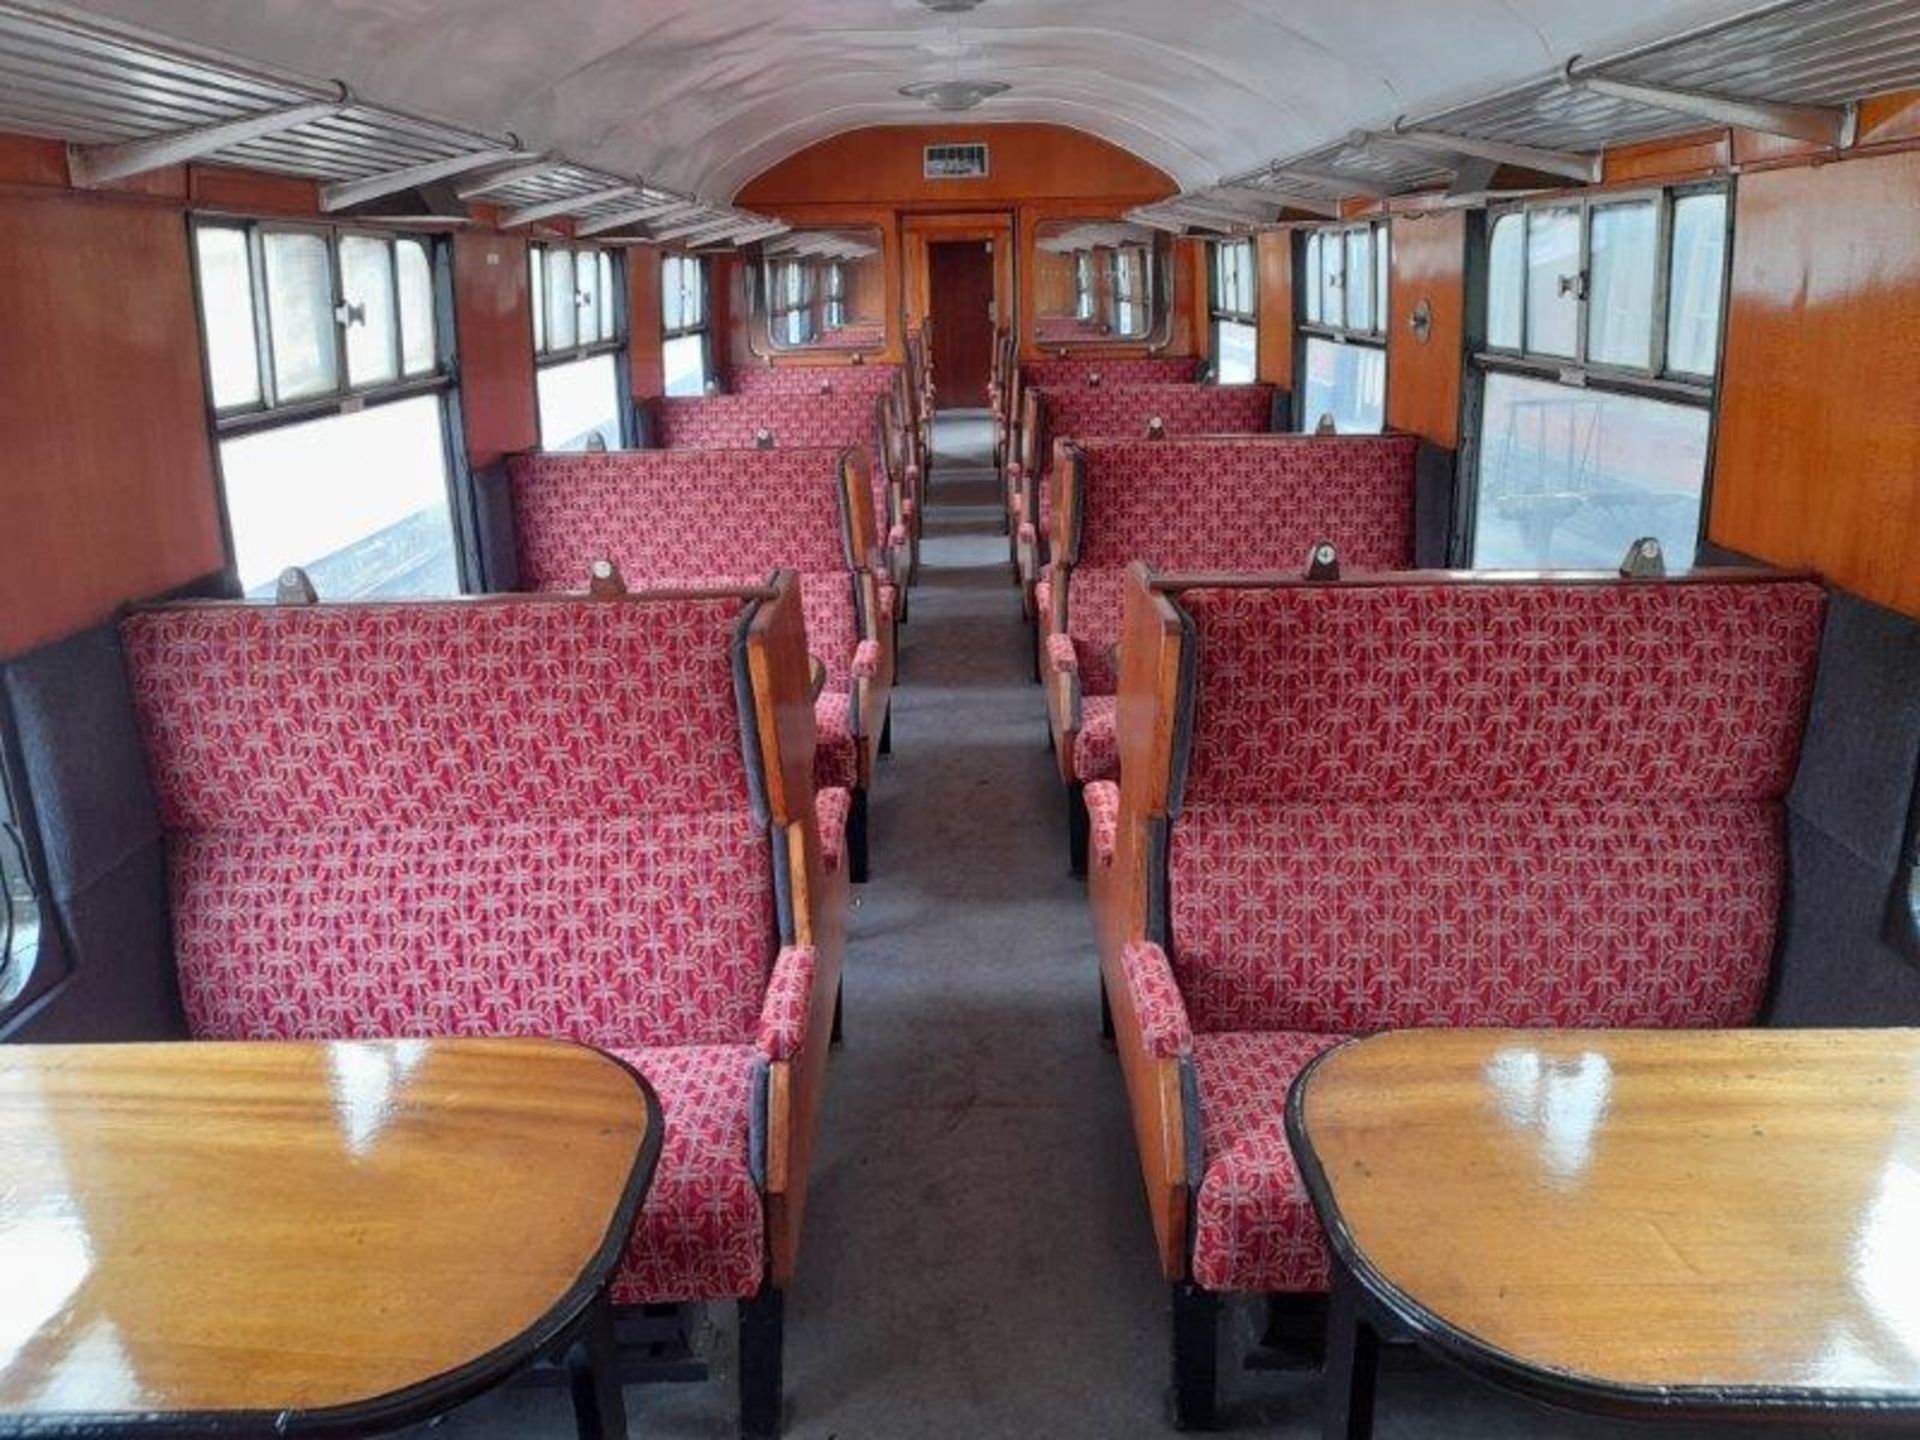 BR Mark 1 type TSO coach, no. M4503, 55-seats and 2 bench seats in red chain link moquette, - Image 9 of 15